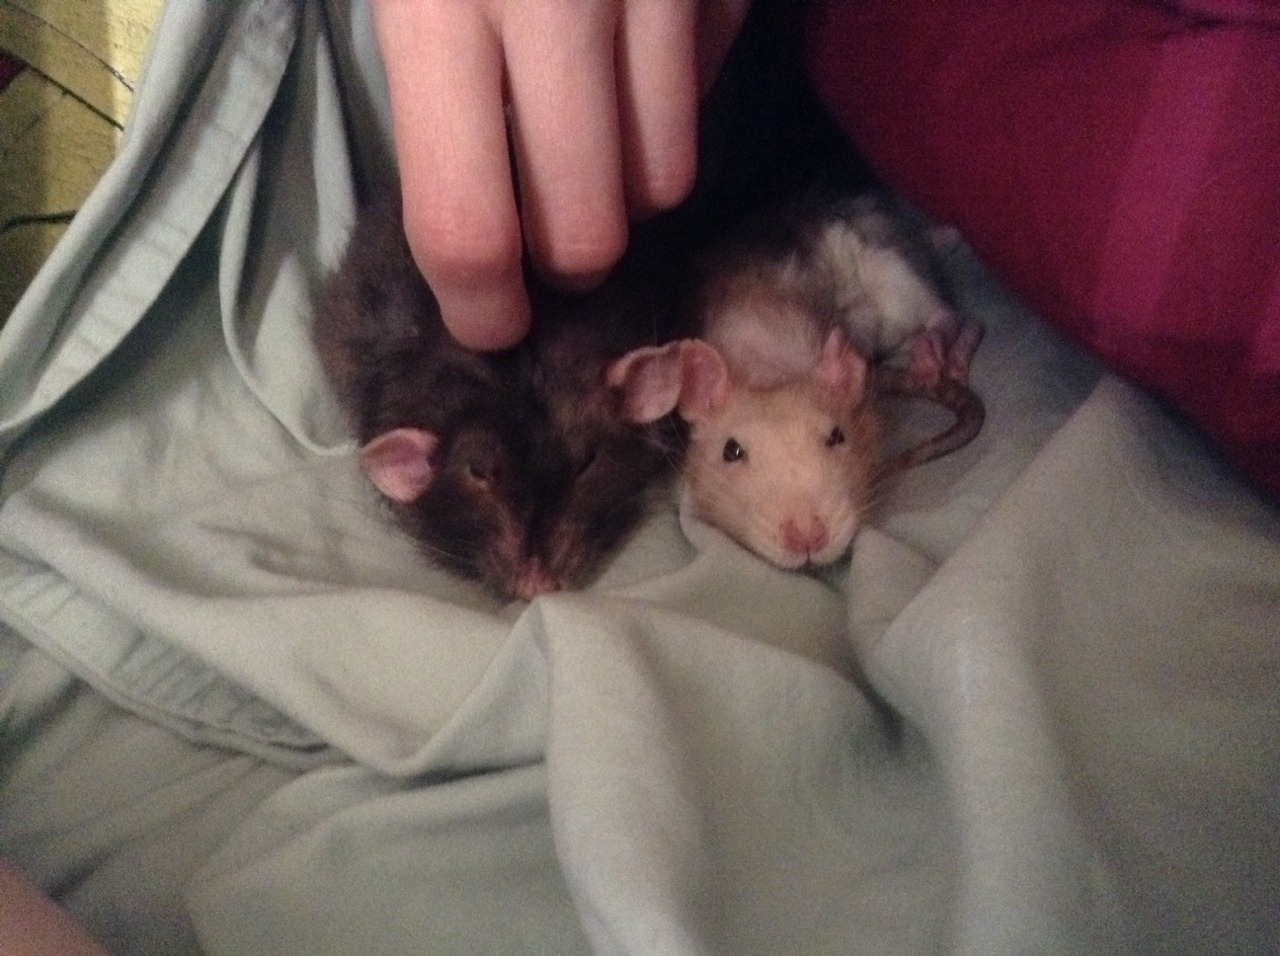 Don&rsquo;t worry, even rats get bed head.